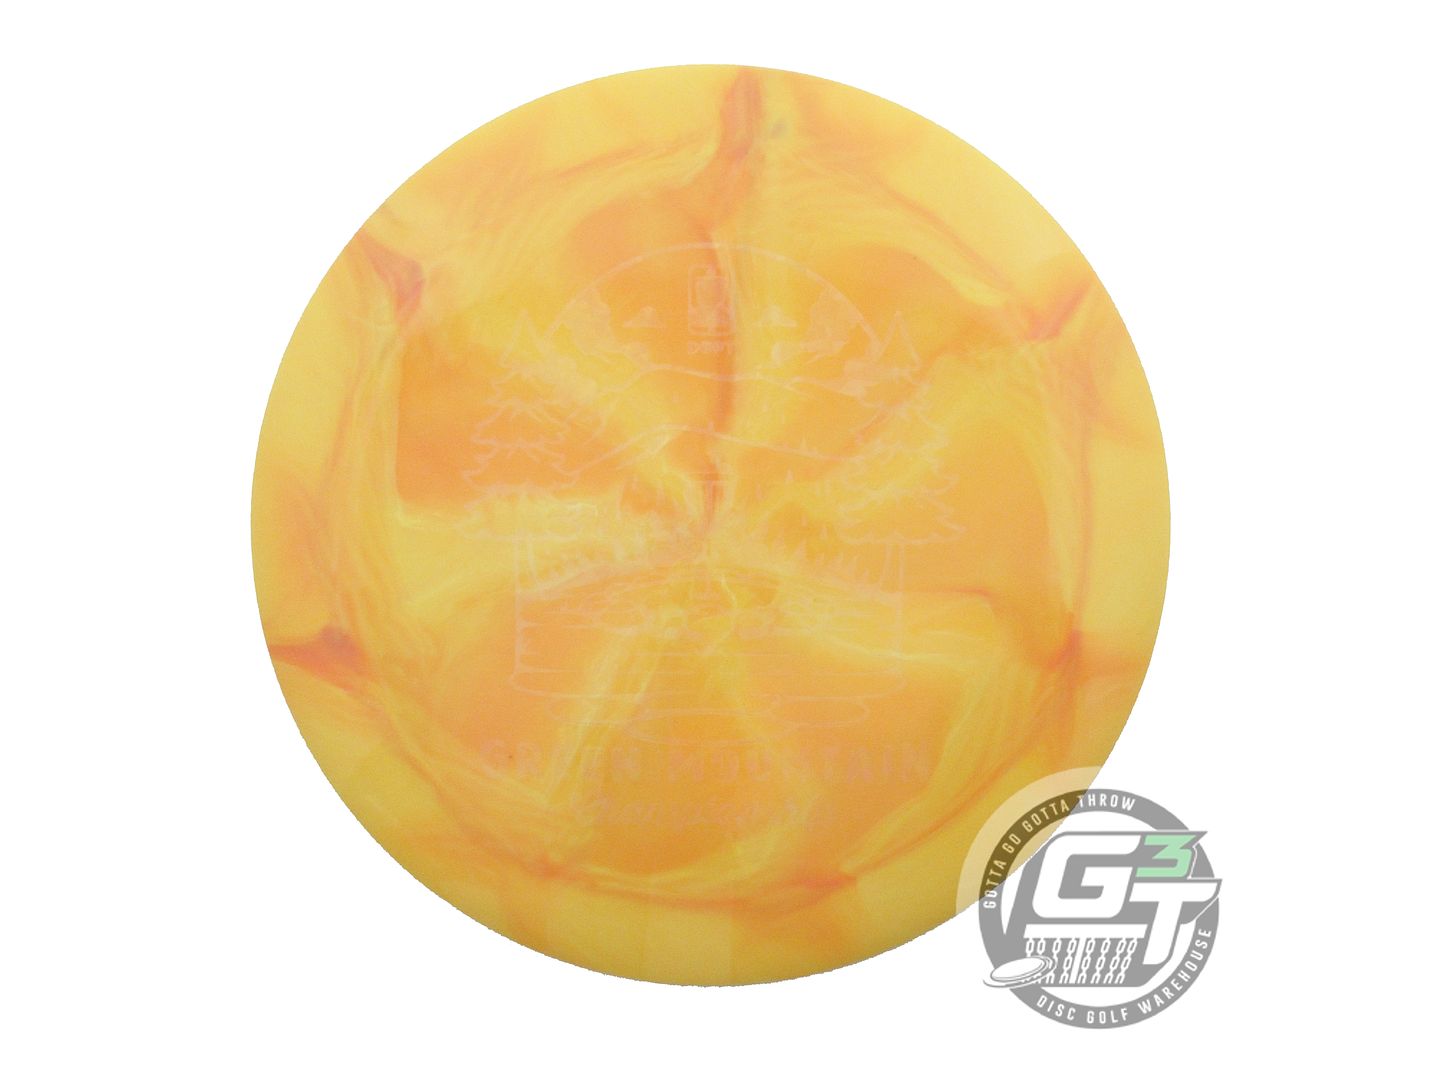 Discraft Limited Edition 2022 Green Mountain Championship Swirl ESP Nuke Distance Driver Golf Disc (Individually Listed)